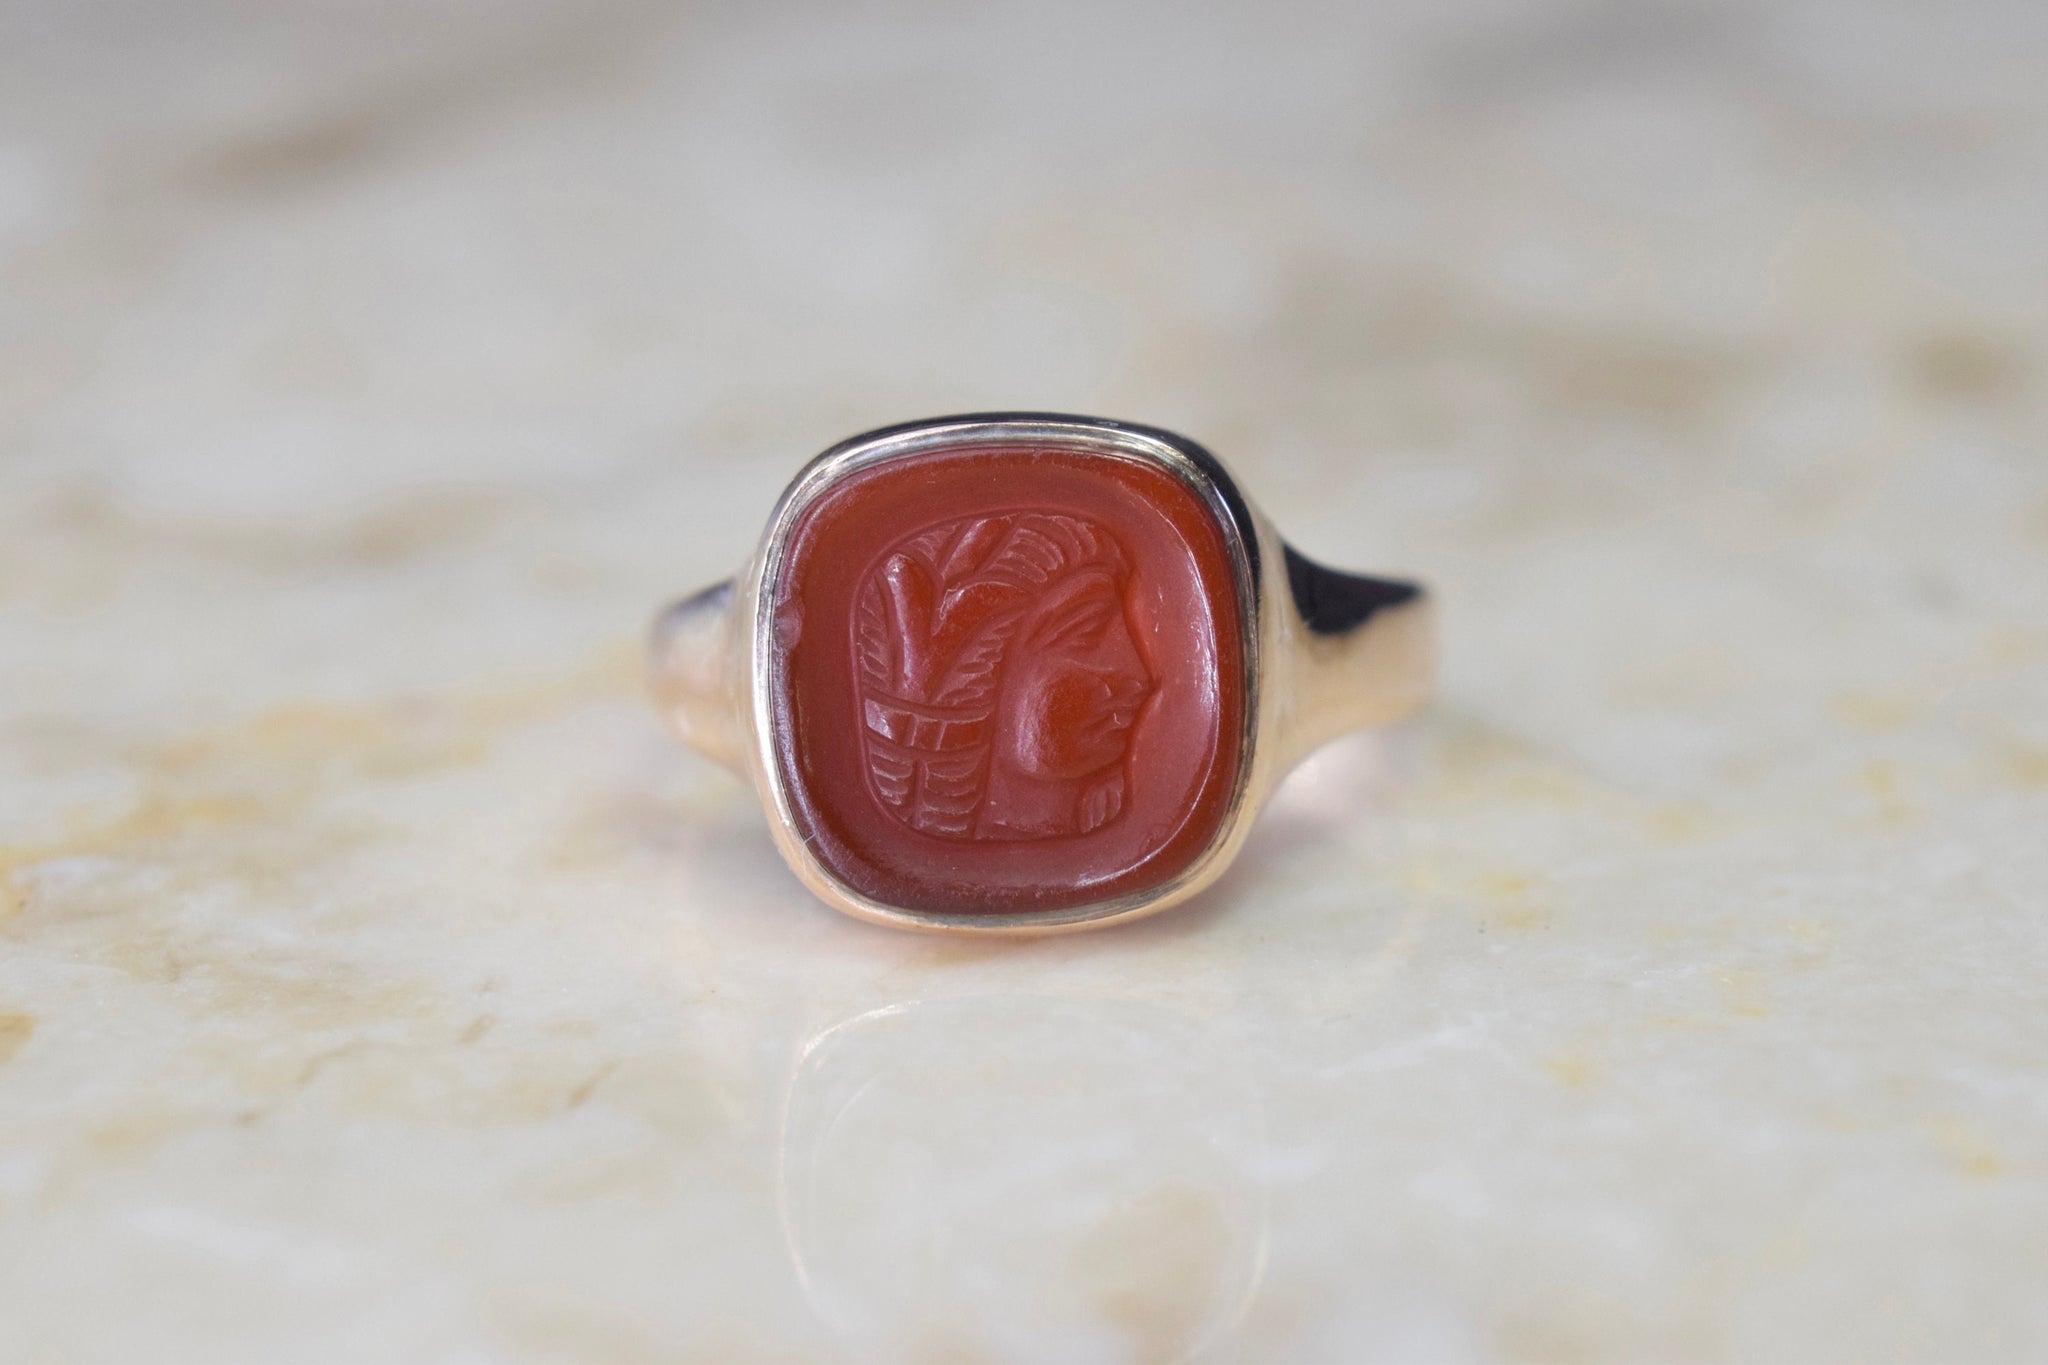 C.1910 Antique British Arts and Crafts Sterling Silver Ring, Carved Natural  Carnelian Stone Art Nouveau - Etsy